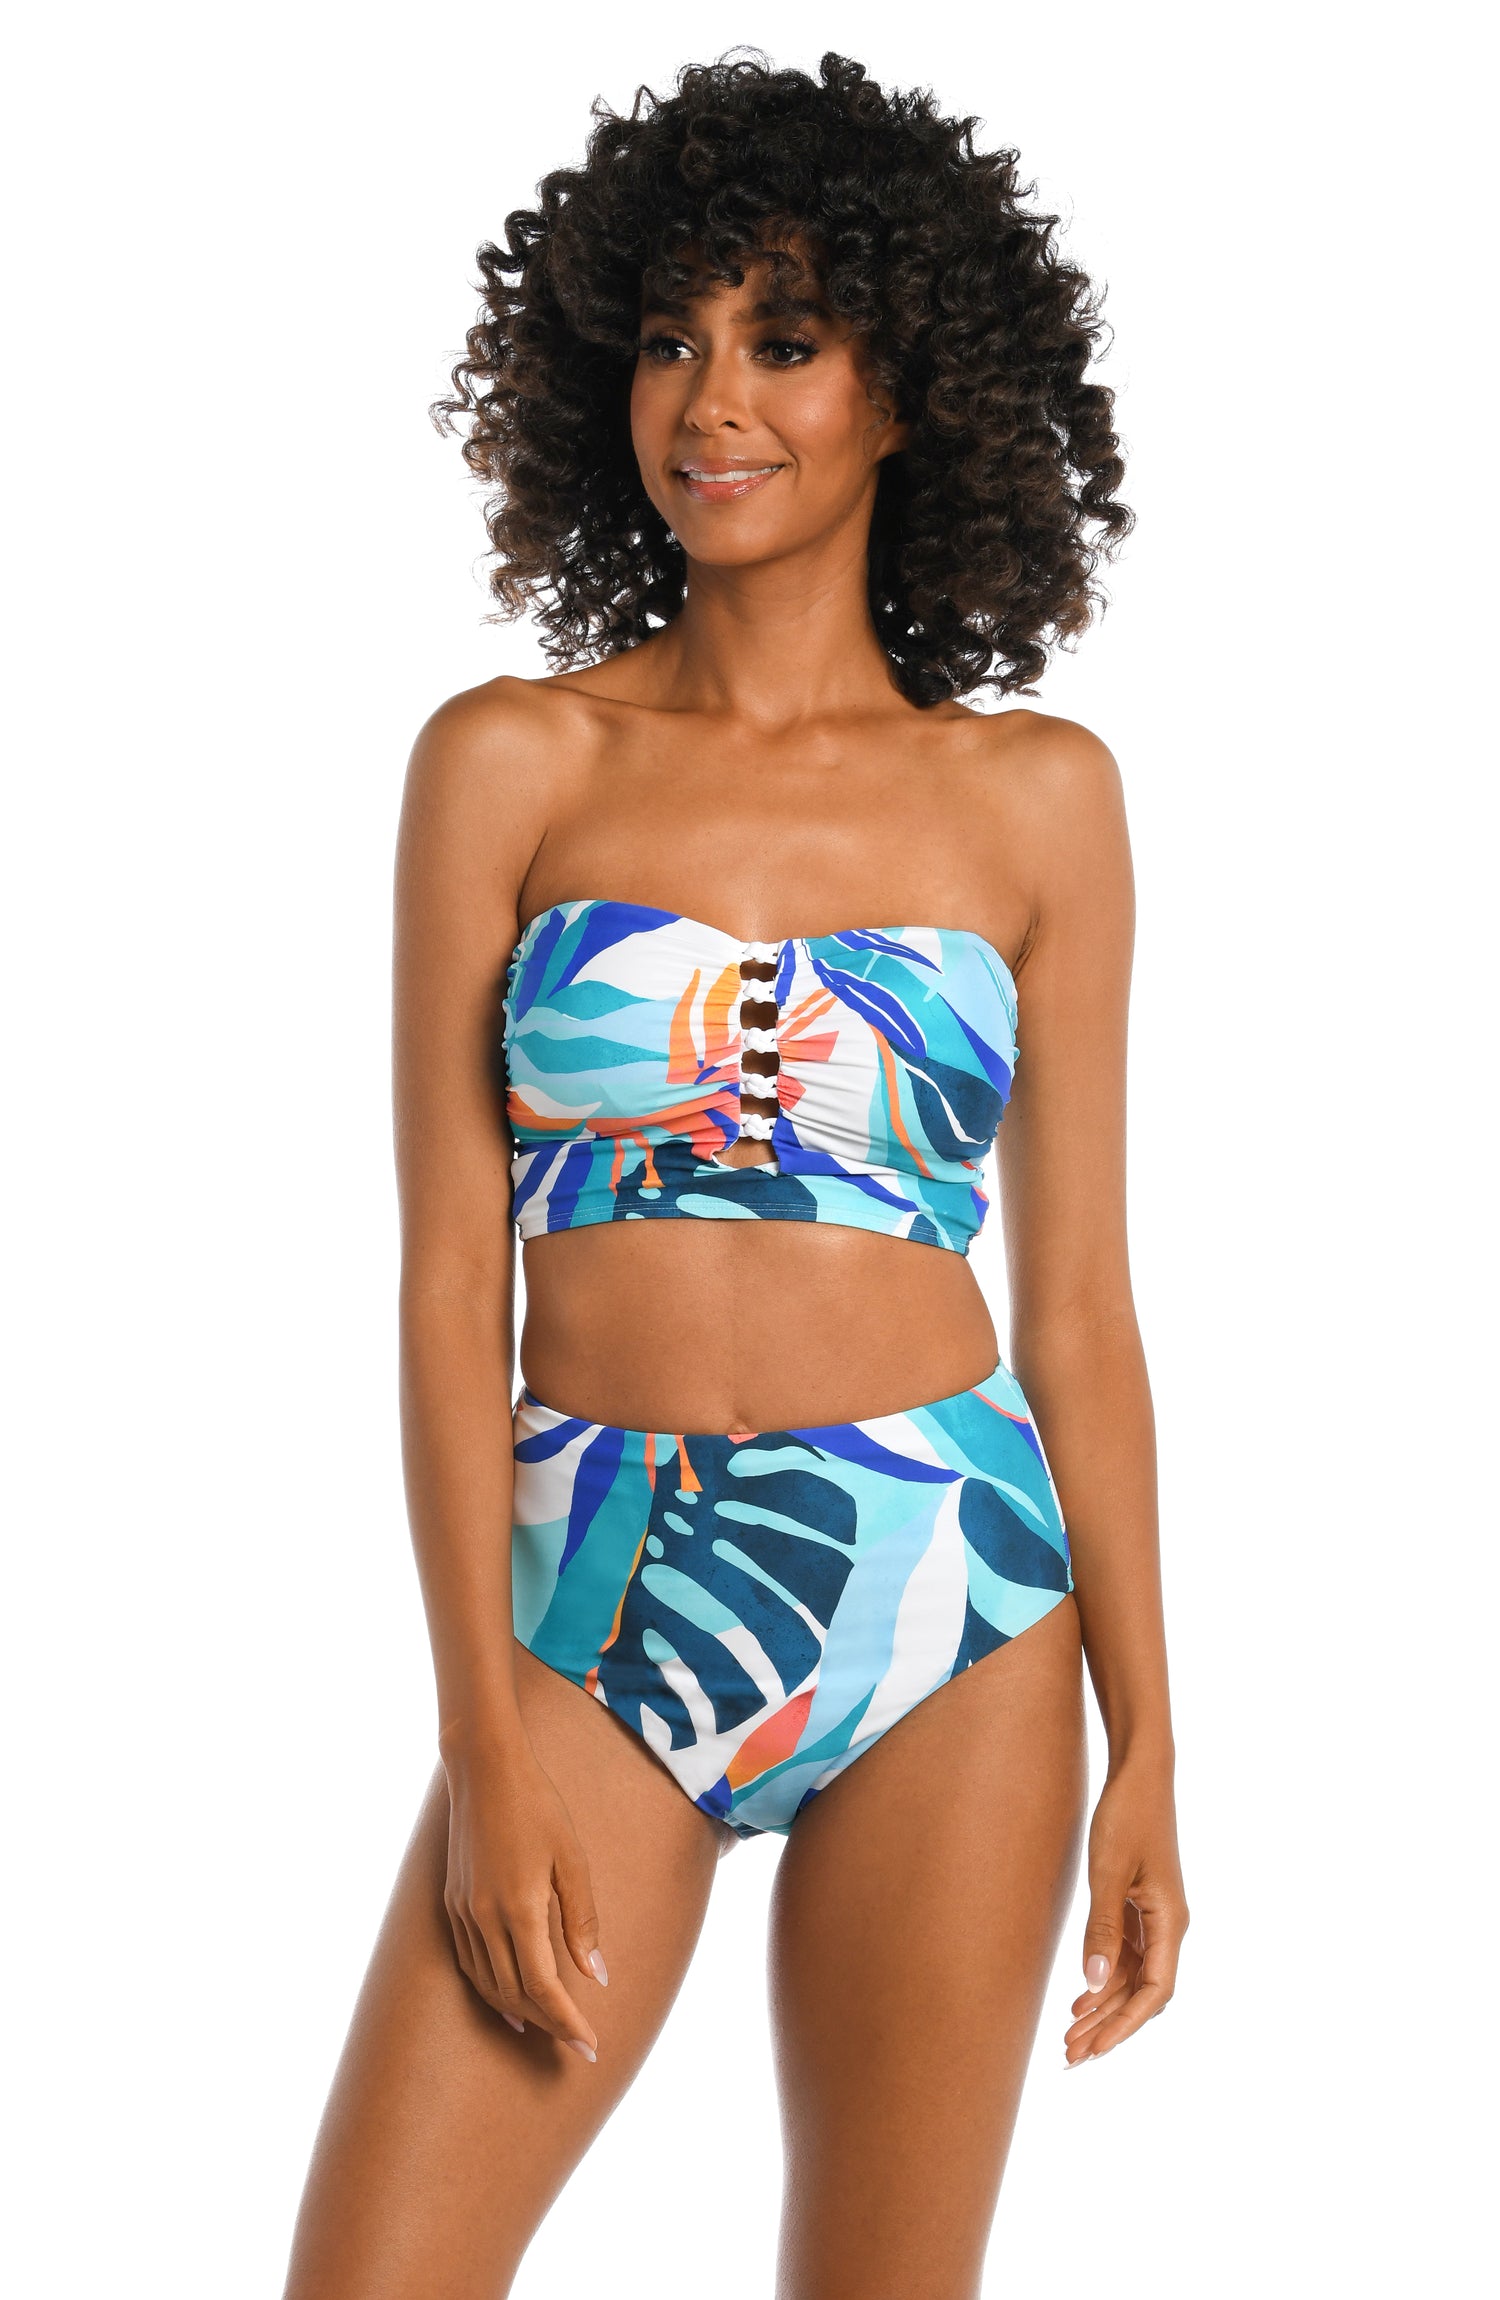 Model is wearing a blue multi colored tropical printed midkini top from our Coastal Palms collection!